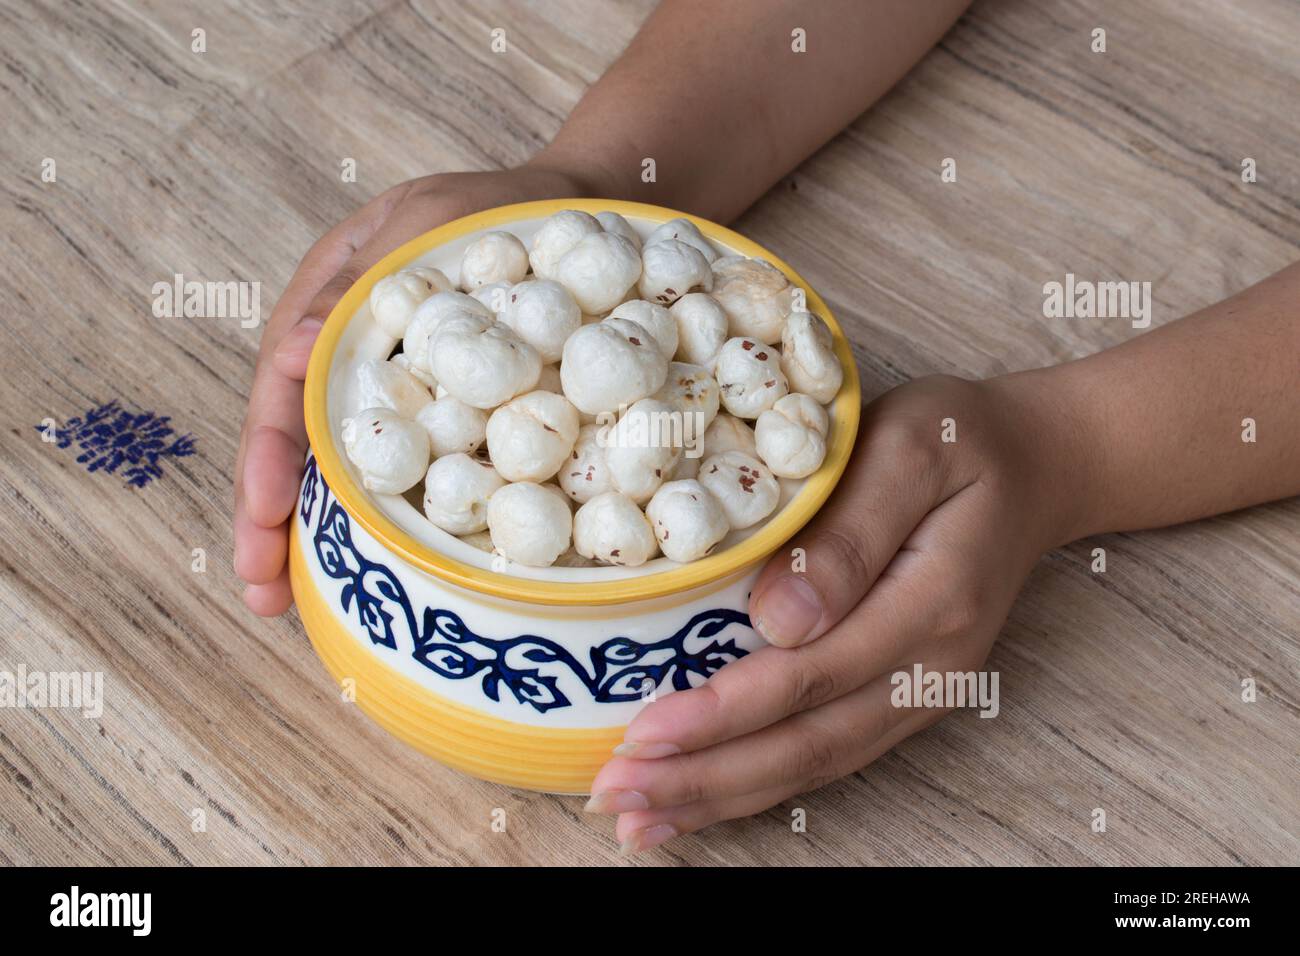 Hand holding beautiful yellow and blue pot containing Makhana or foxnut in brown background. Offering Healthy Food. selective focus on subject Stock Photo